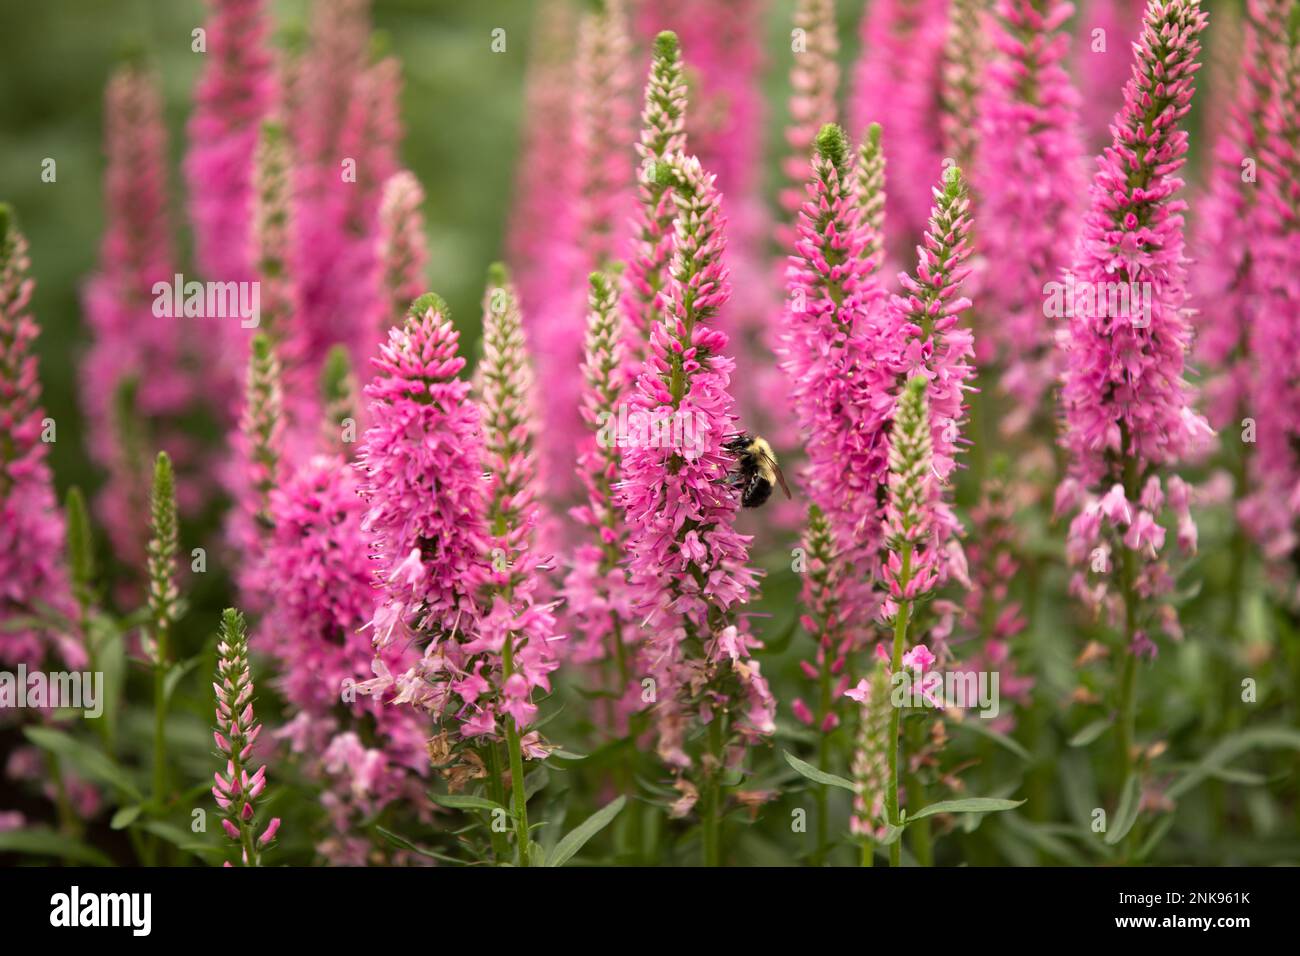 A bumble bee pollinating a pink Veronica flower. Stock Photo